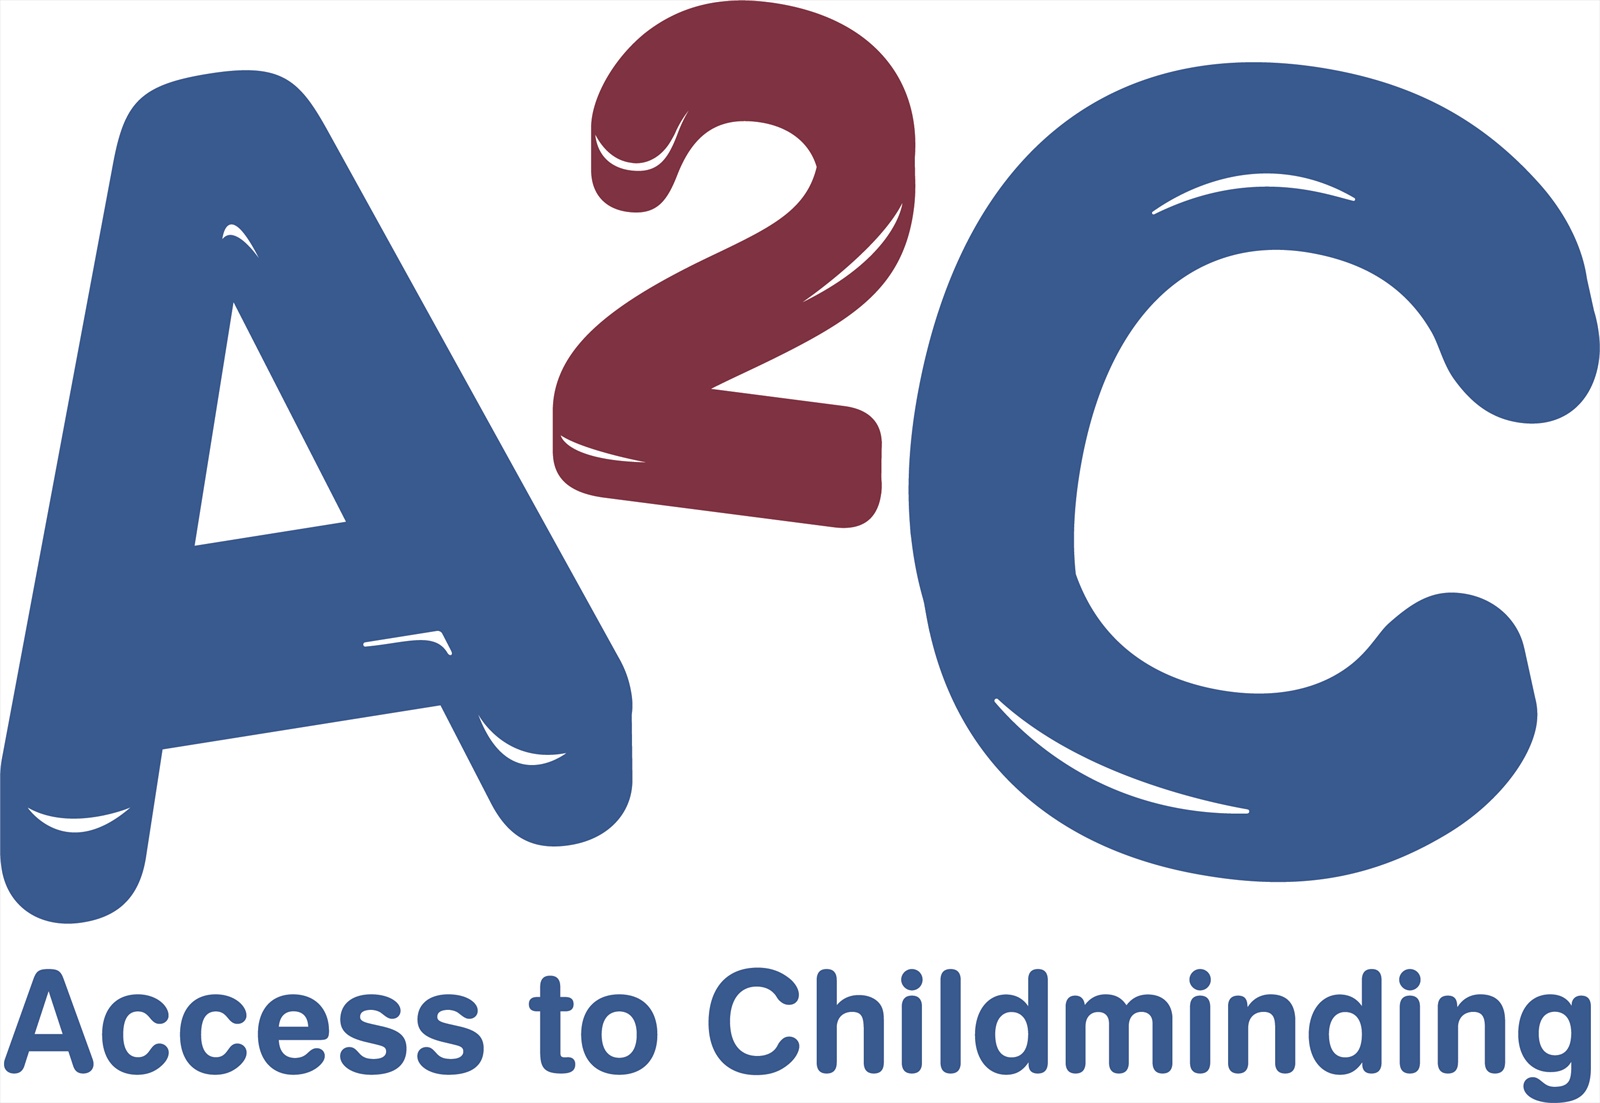 £250,000 Childminding Initiative Supports Families Back Into Employment